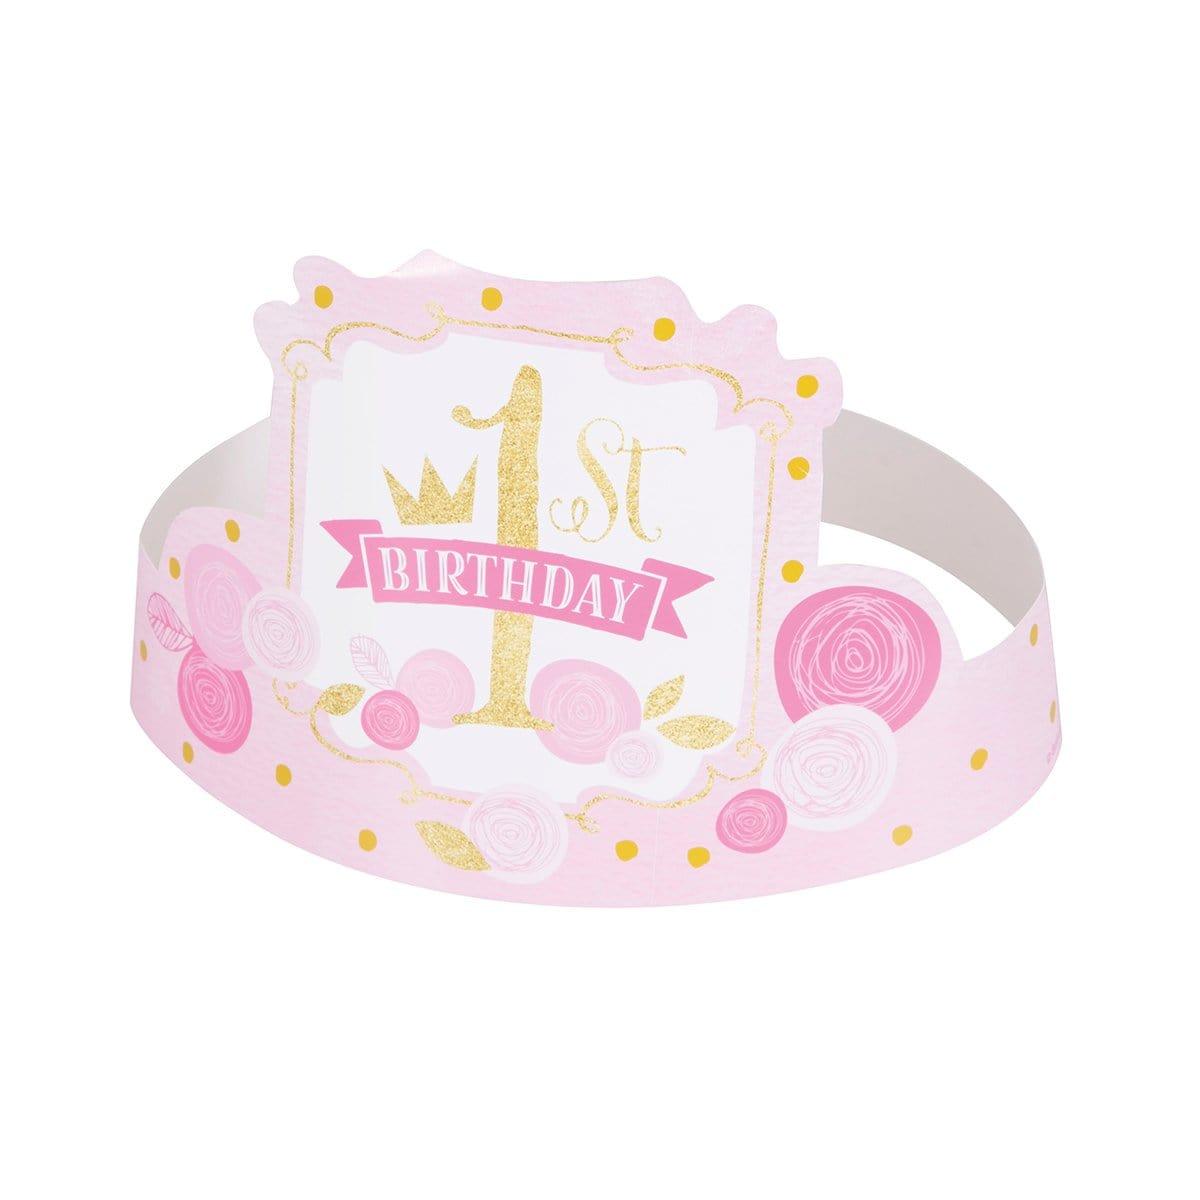 Buy 1st Birthday Pink/gold 1st Birthday - Hats 6/pkg sold at Party Expert